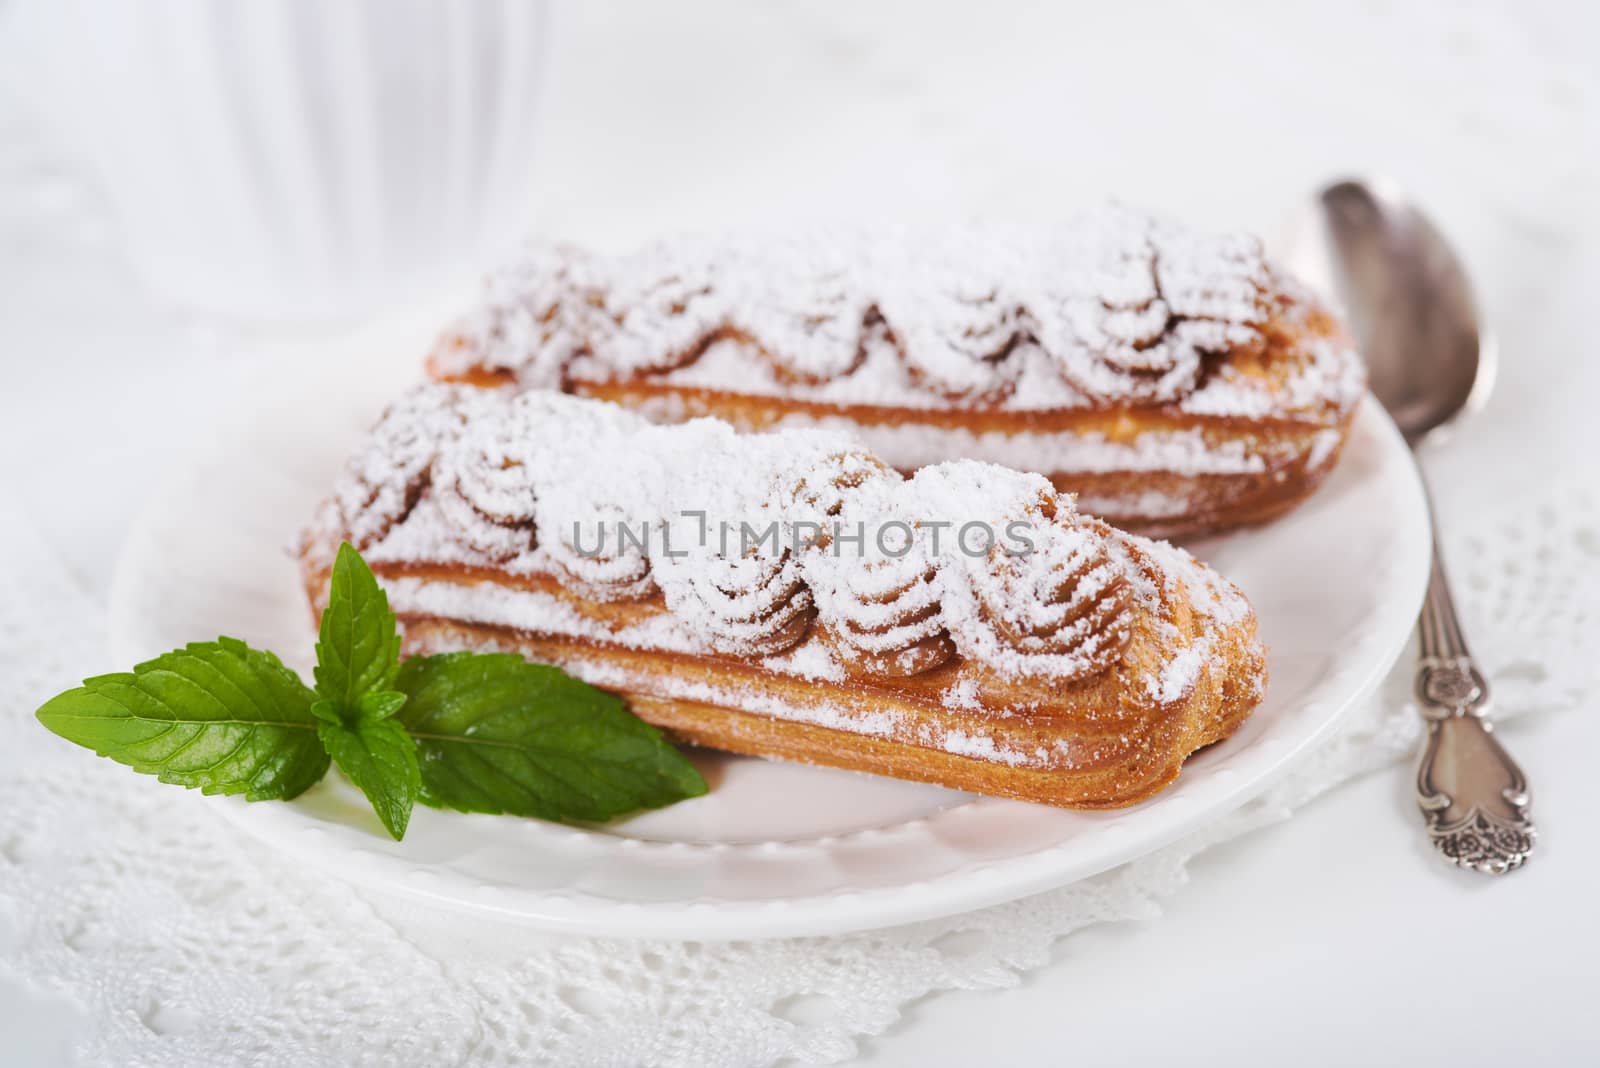 Eclairs on plate on a table on light background